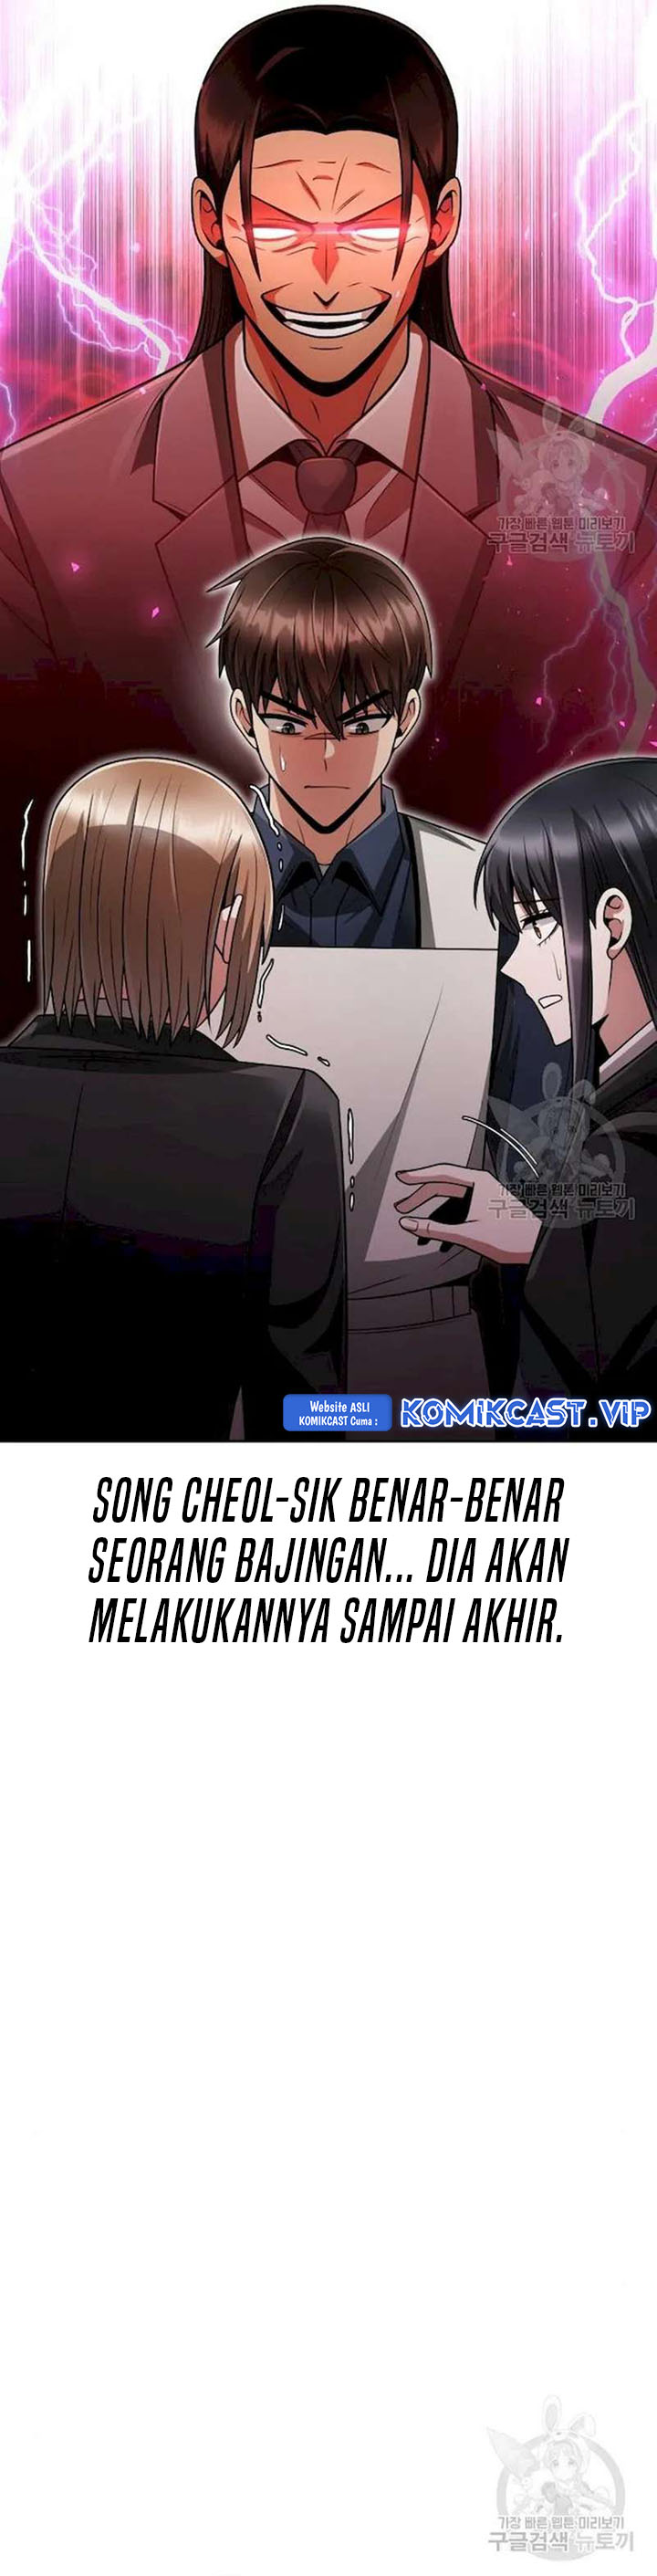 Dilarang COPAS - situs resmi www.mangacanblog.com - Komik clever cleaning life of the returned genius hunter 041 - chapter 41 42 Indonesia clever cleaning life of the returned genius hunter 041 - chapter 41 Terbaru 22|Baca Manga Komik Indonesia|Mangacan